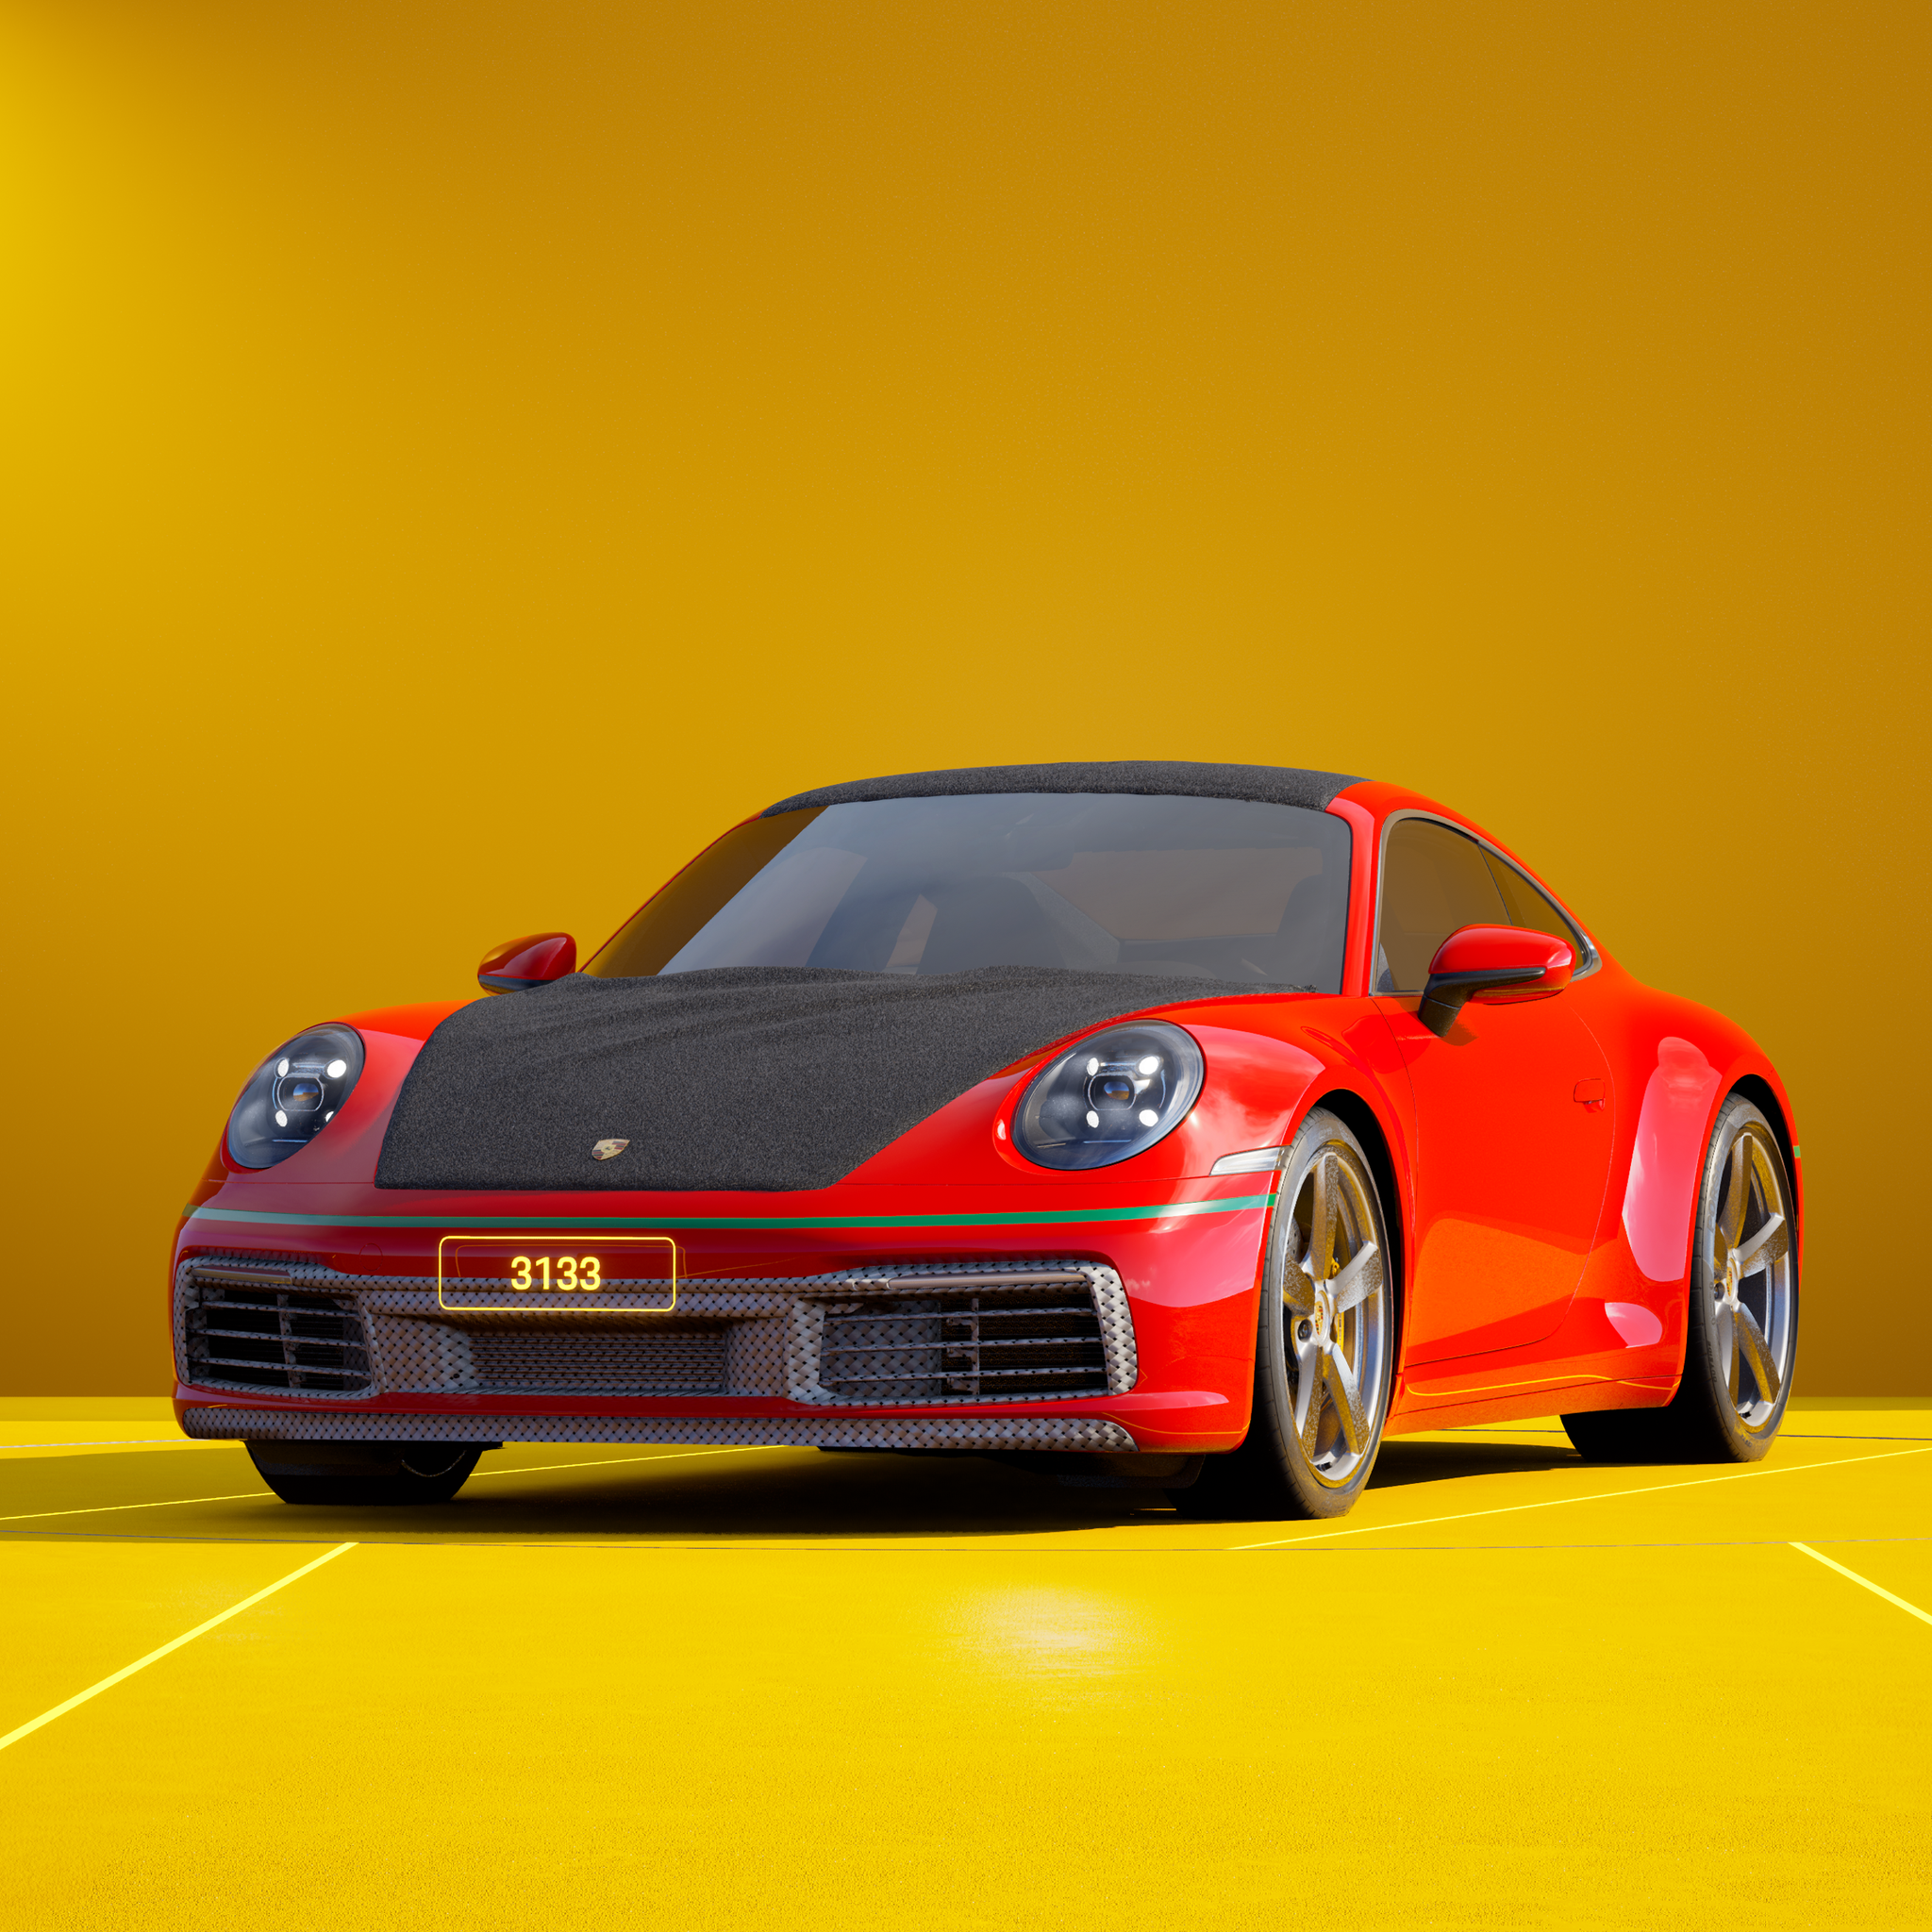 The PORSCHΞ 911 3133 image in phase